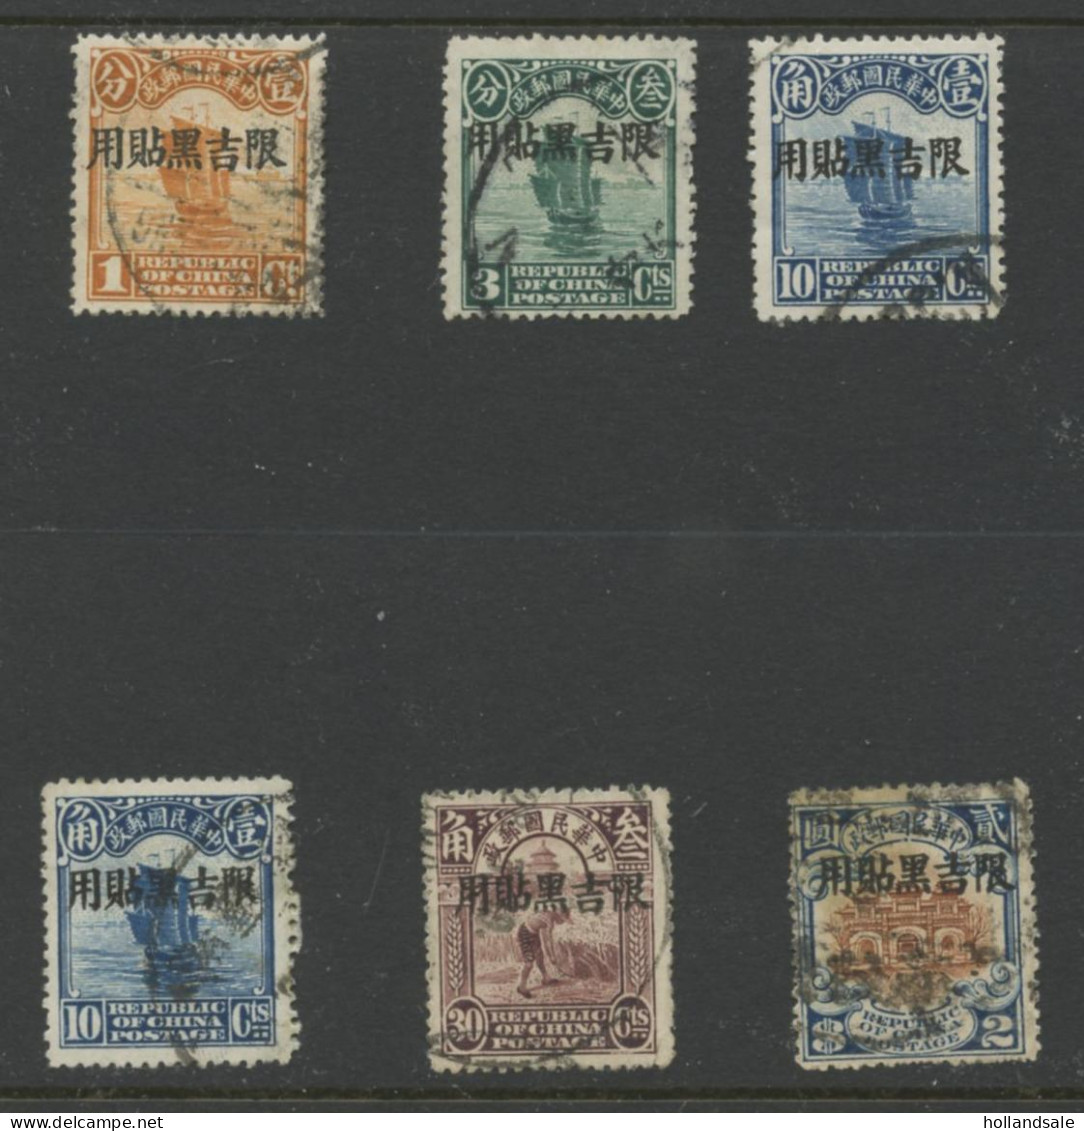 CHINA / Province Manchuria - Six (6) Overprinted Stamps. Used. Including $2. - Mandchourie 1927-33